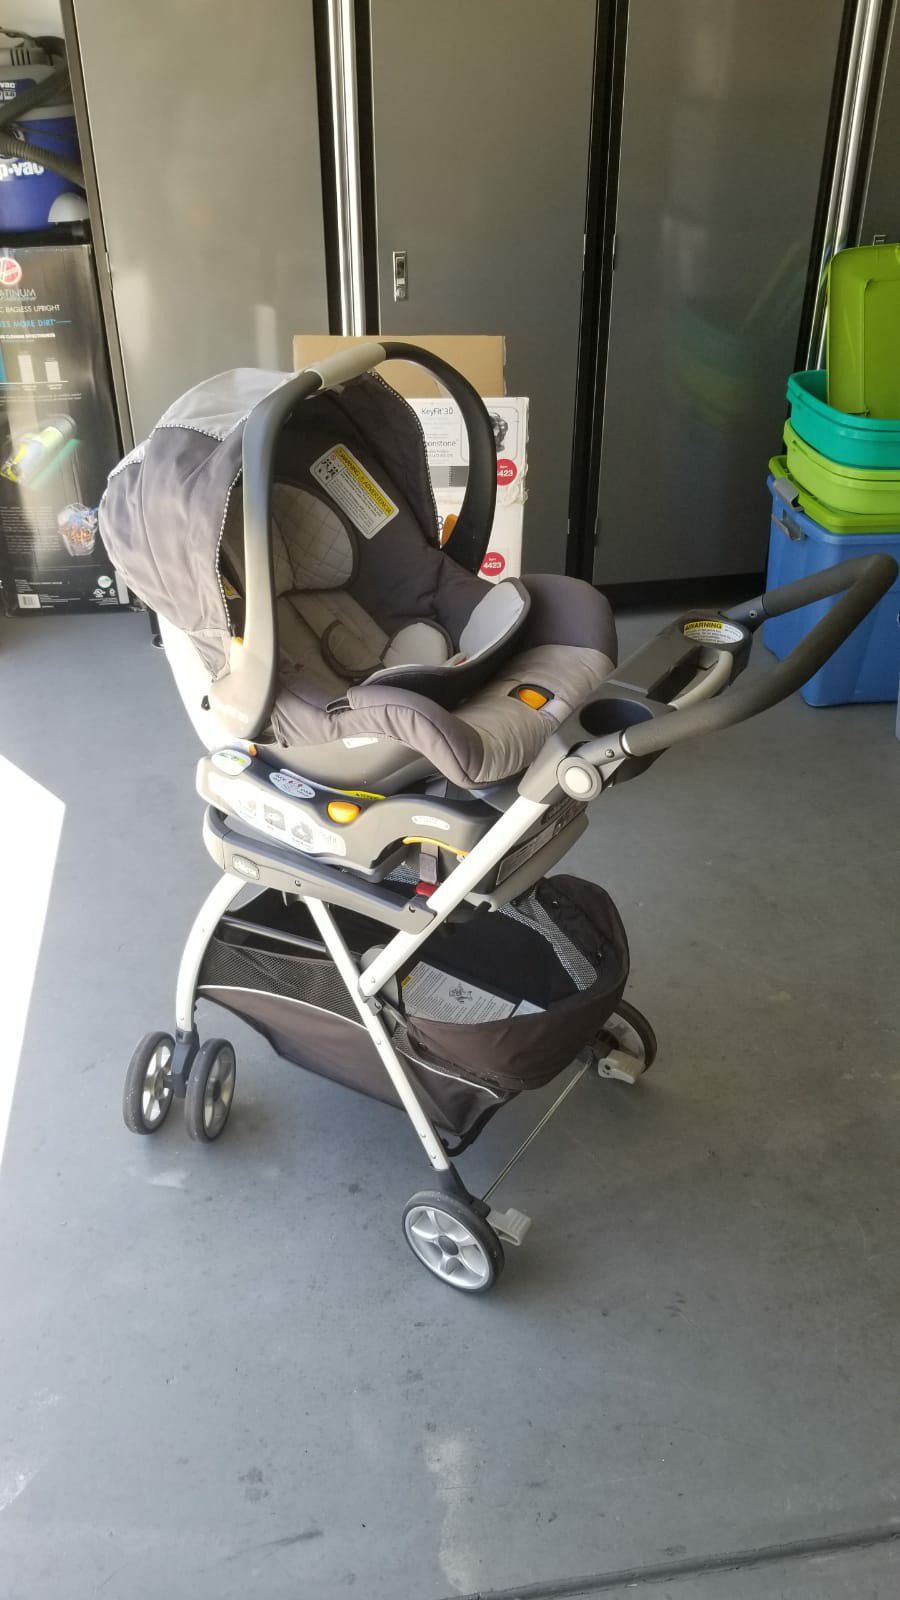 Almost new Chicco brand carseat with base and frame stroller.